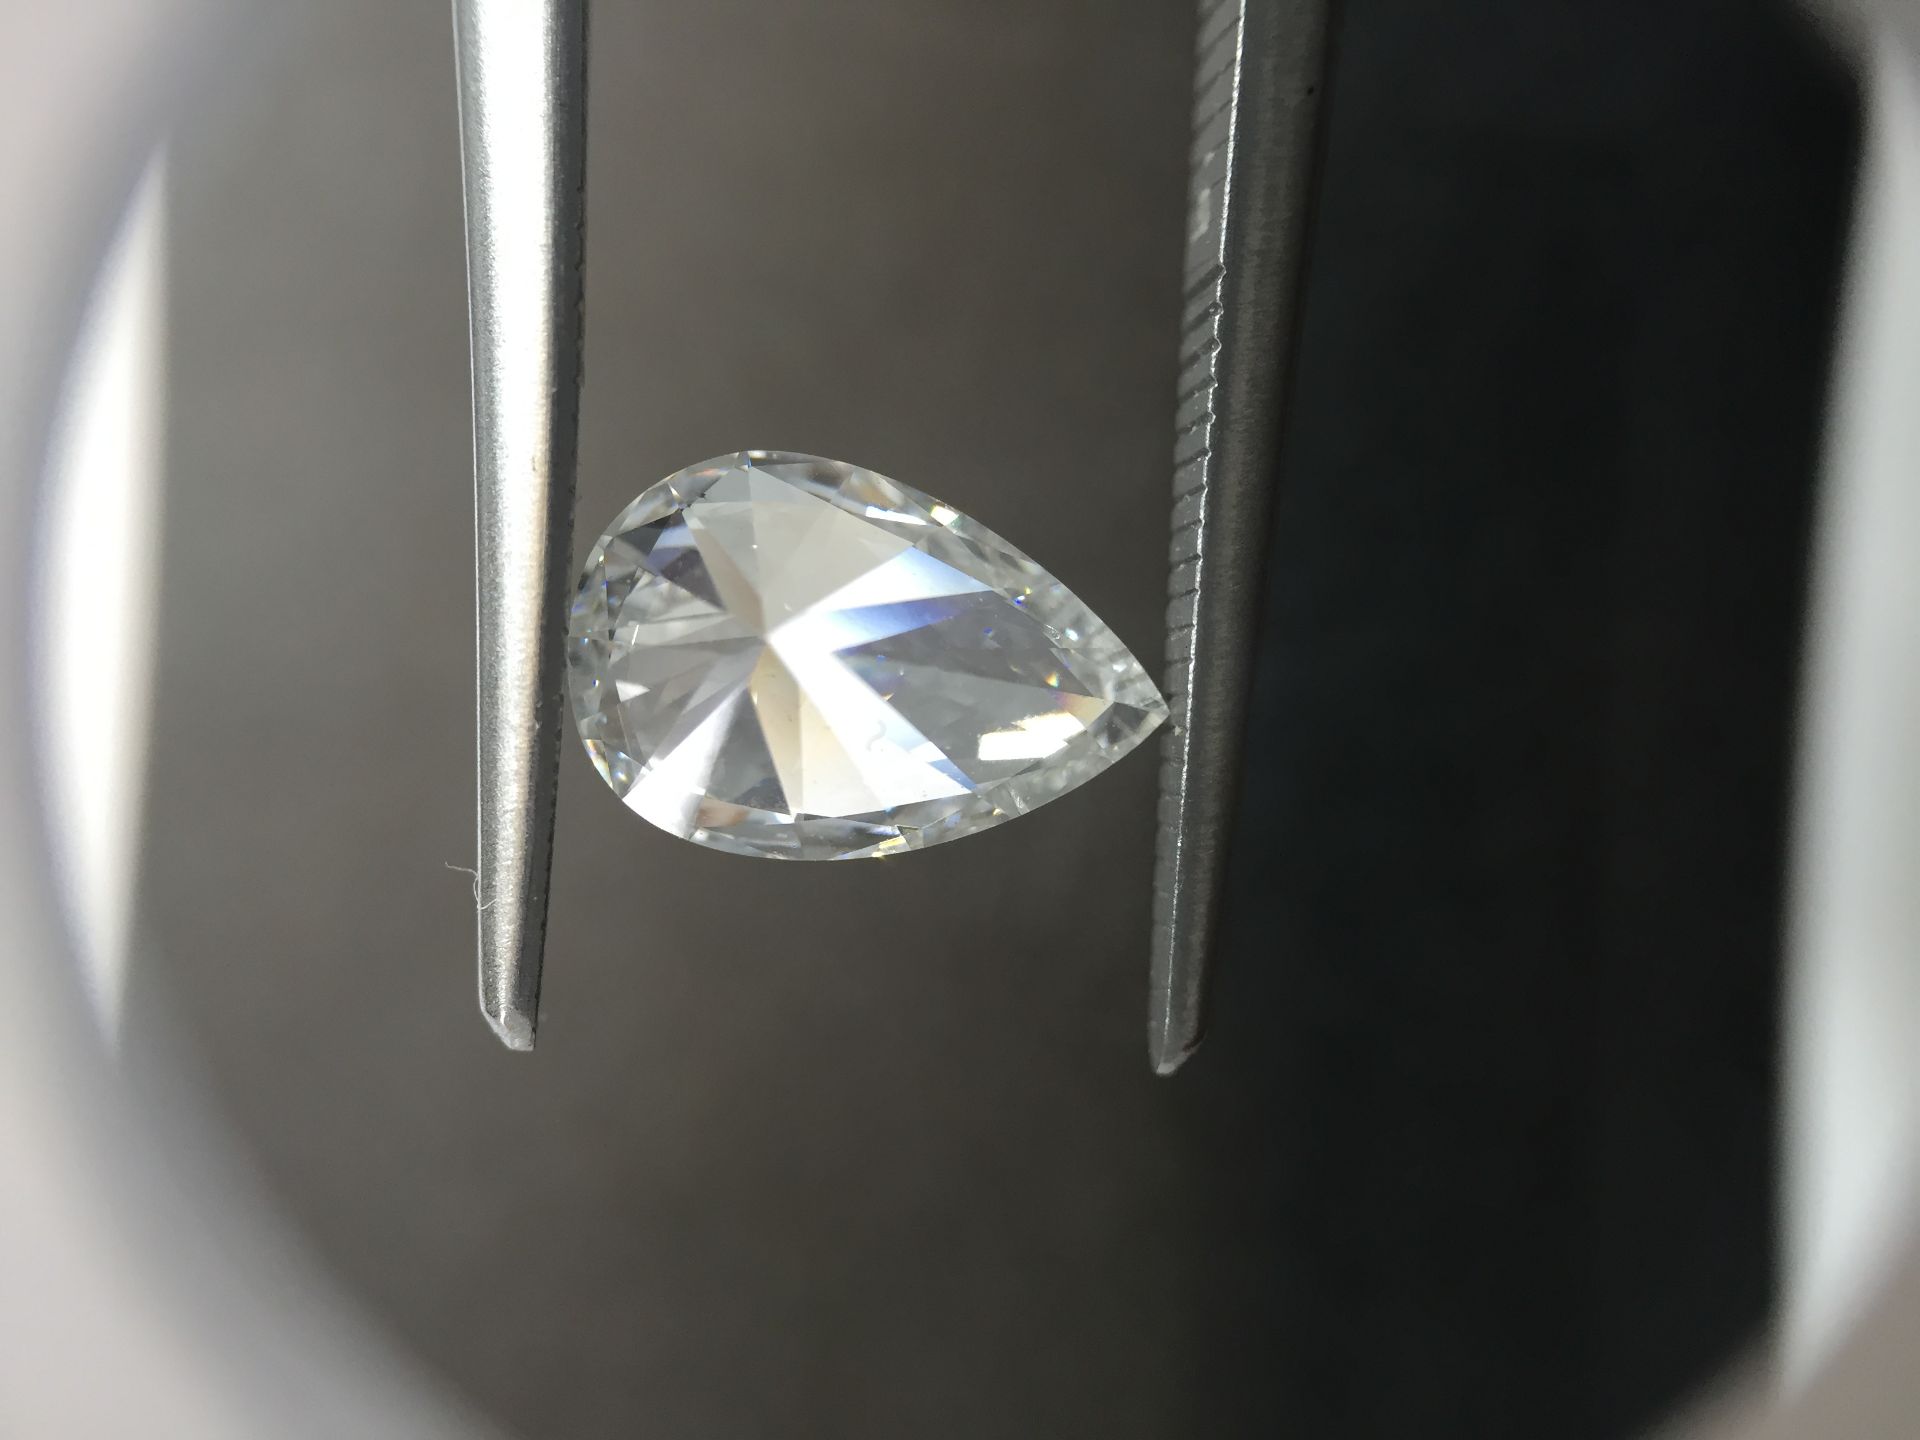 1.01ct pear cut diamond. F colour, SI1 clarity. GIA certification _ 1172582773. 9.15 x 6.11 x 3. - Image 2 of 2